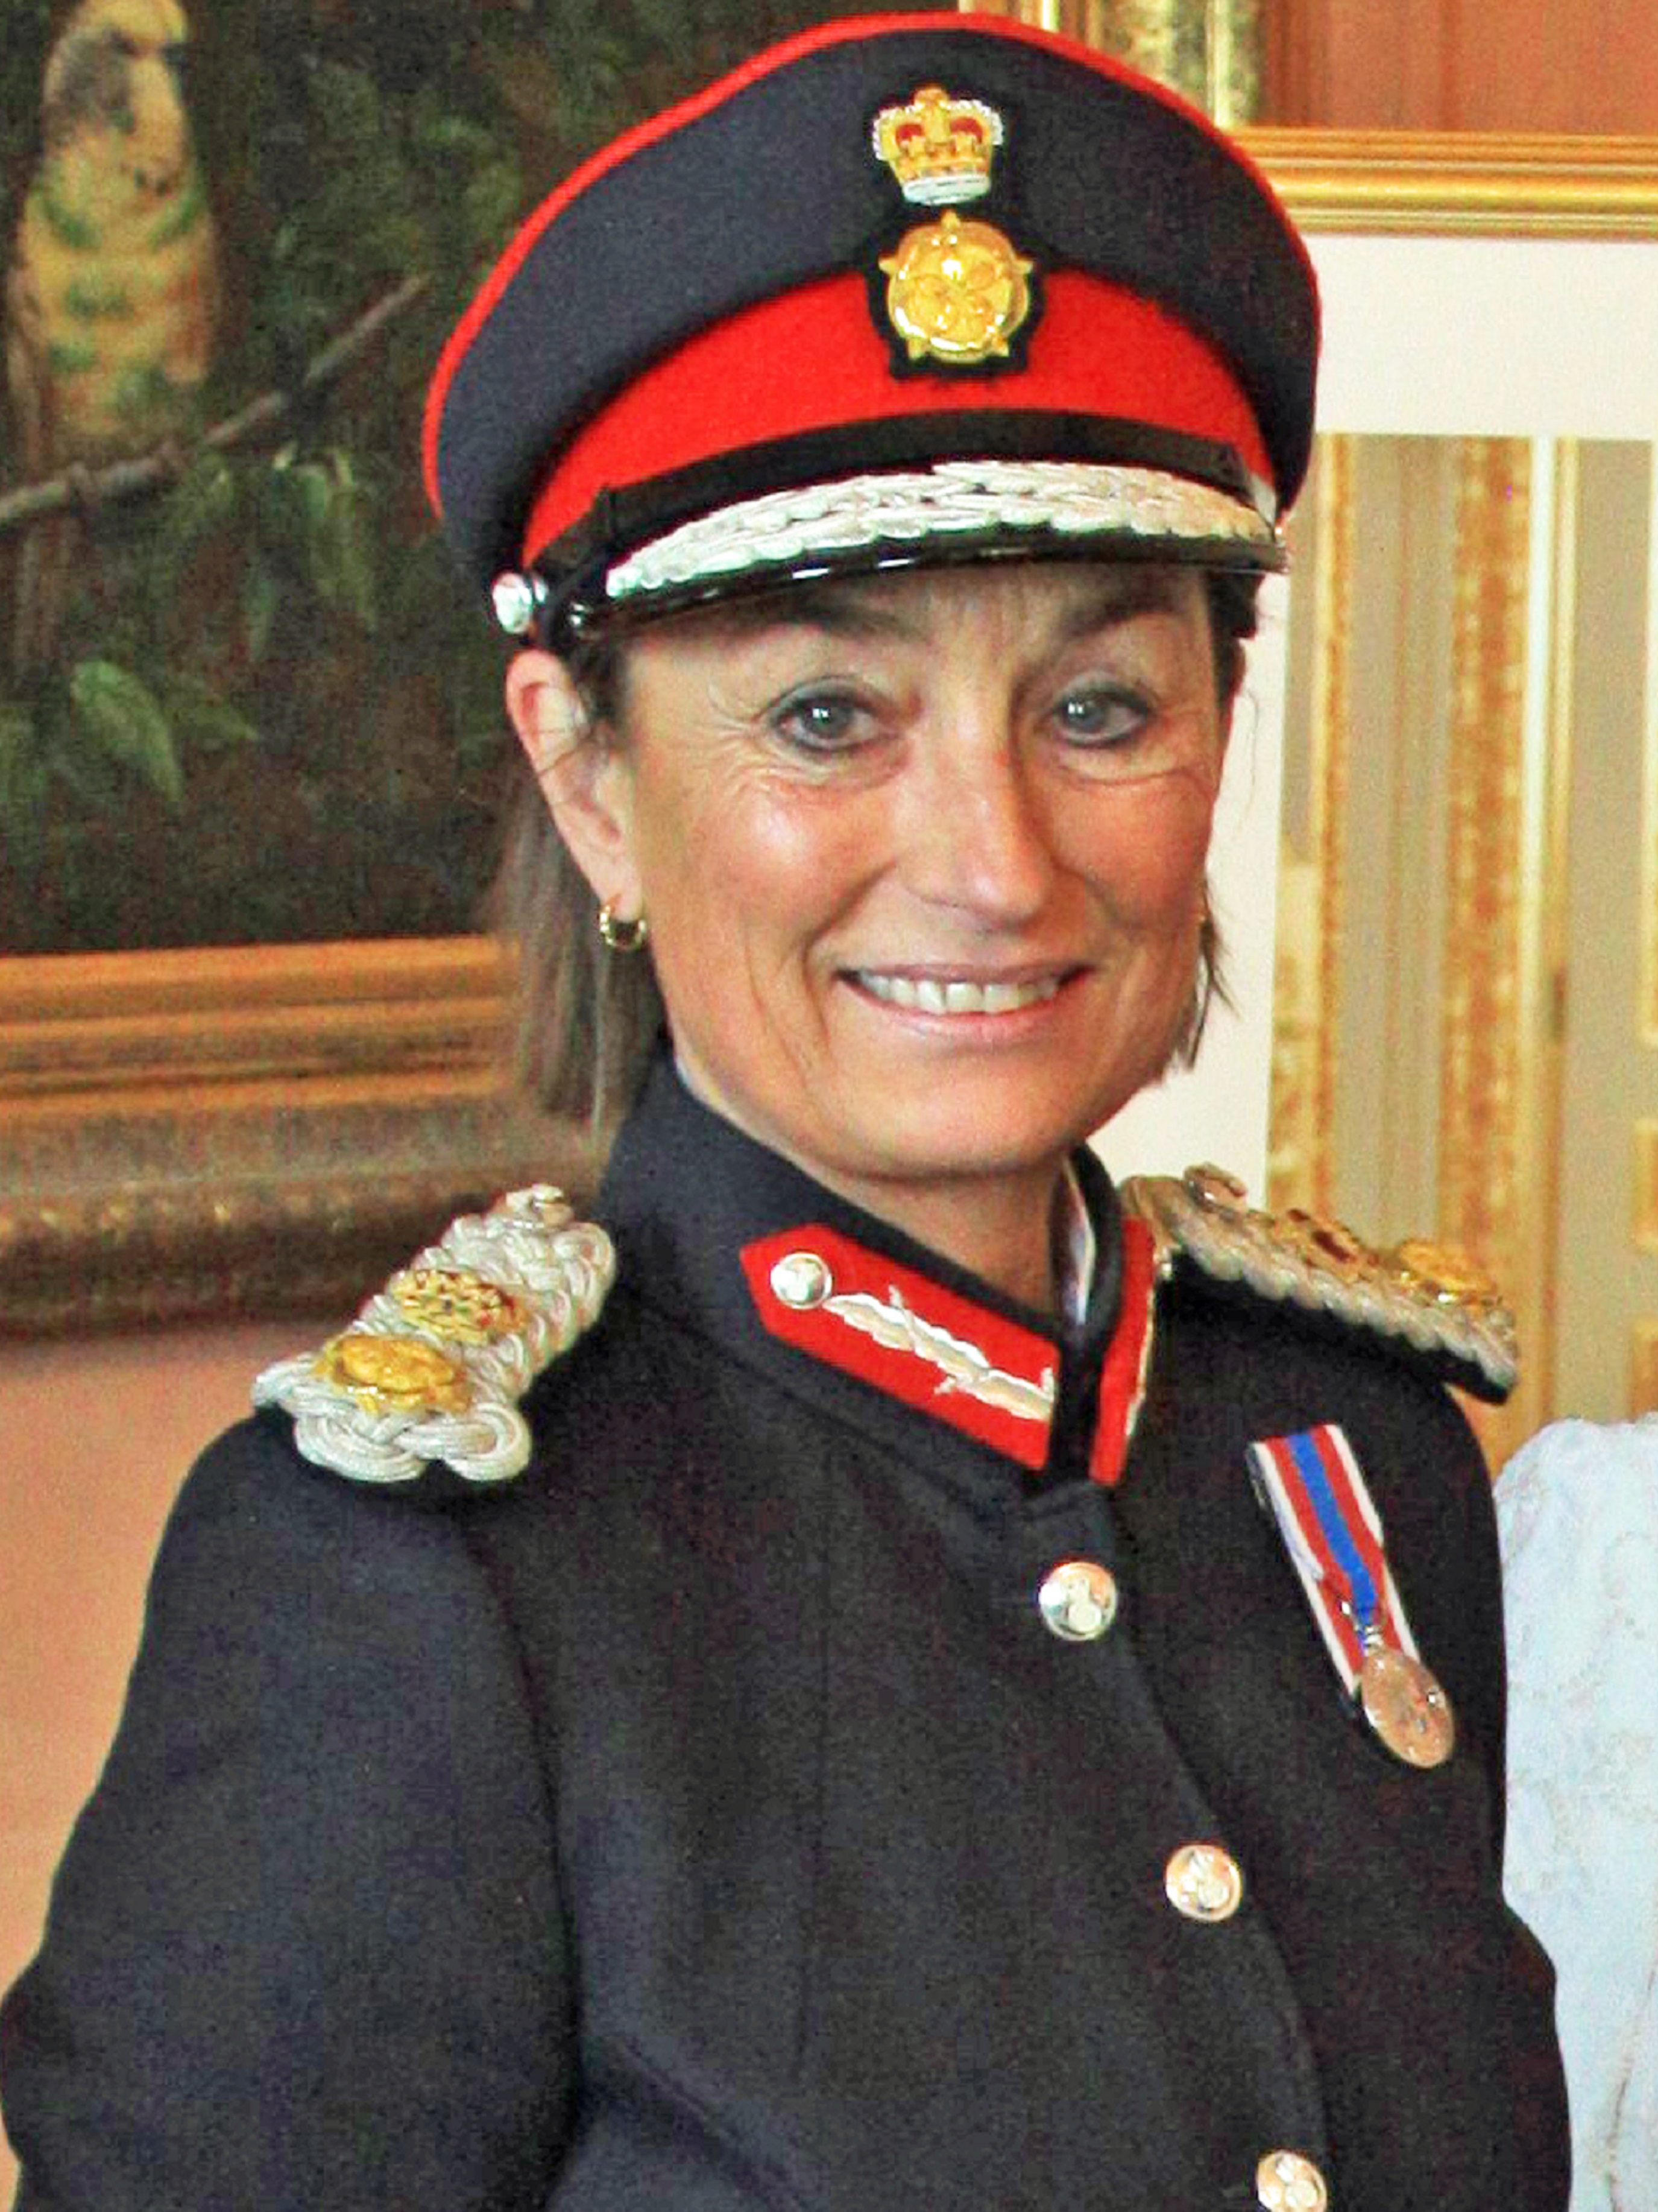 The Lord Lieutenant of North Yorkshire, Jo Ropner.